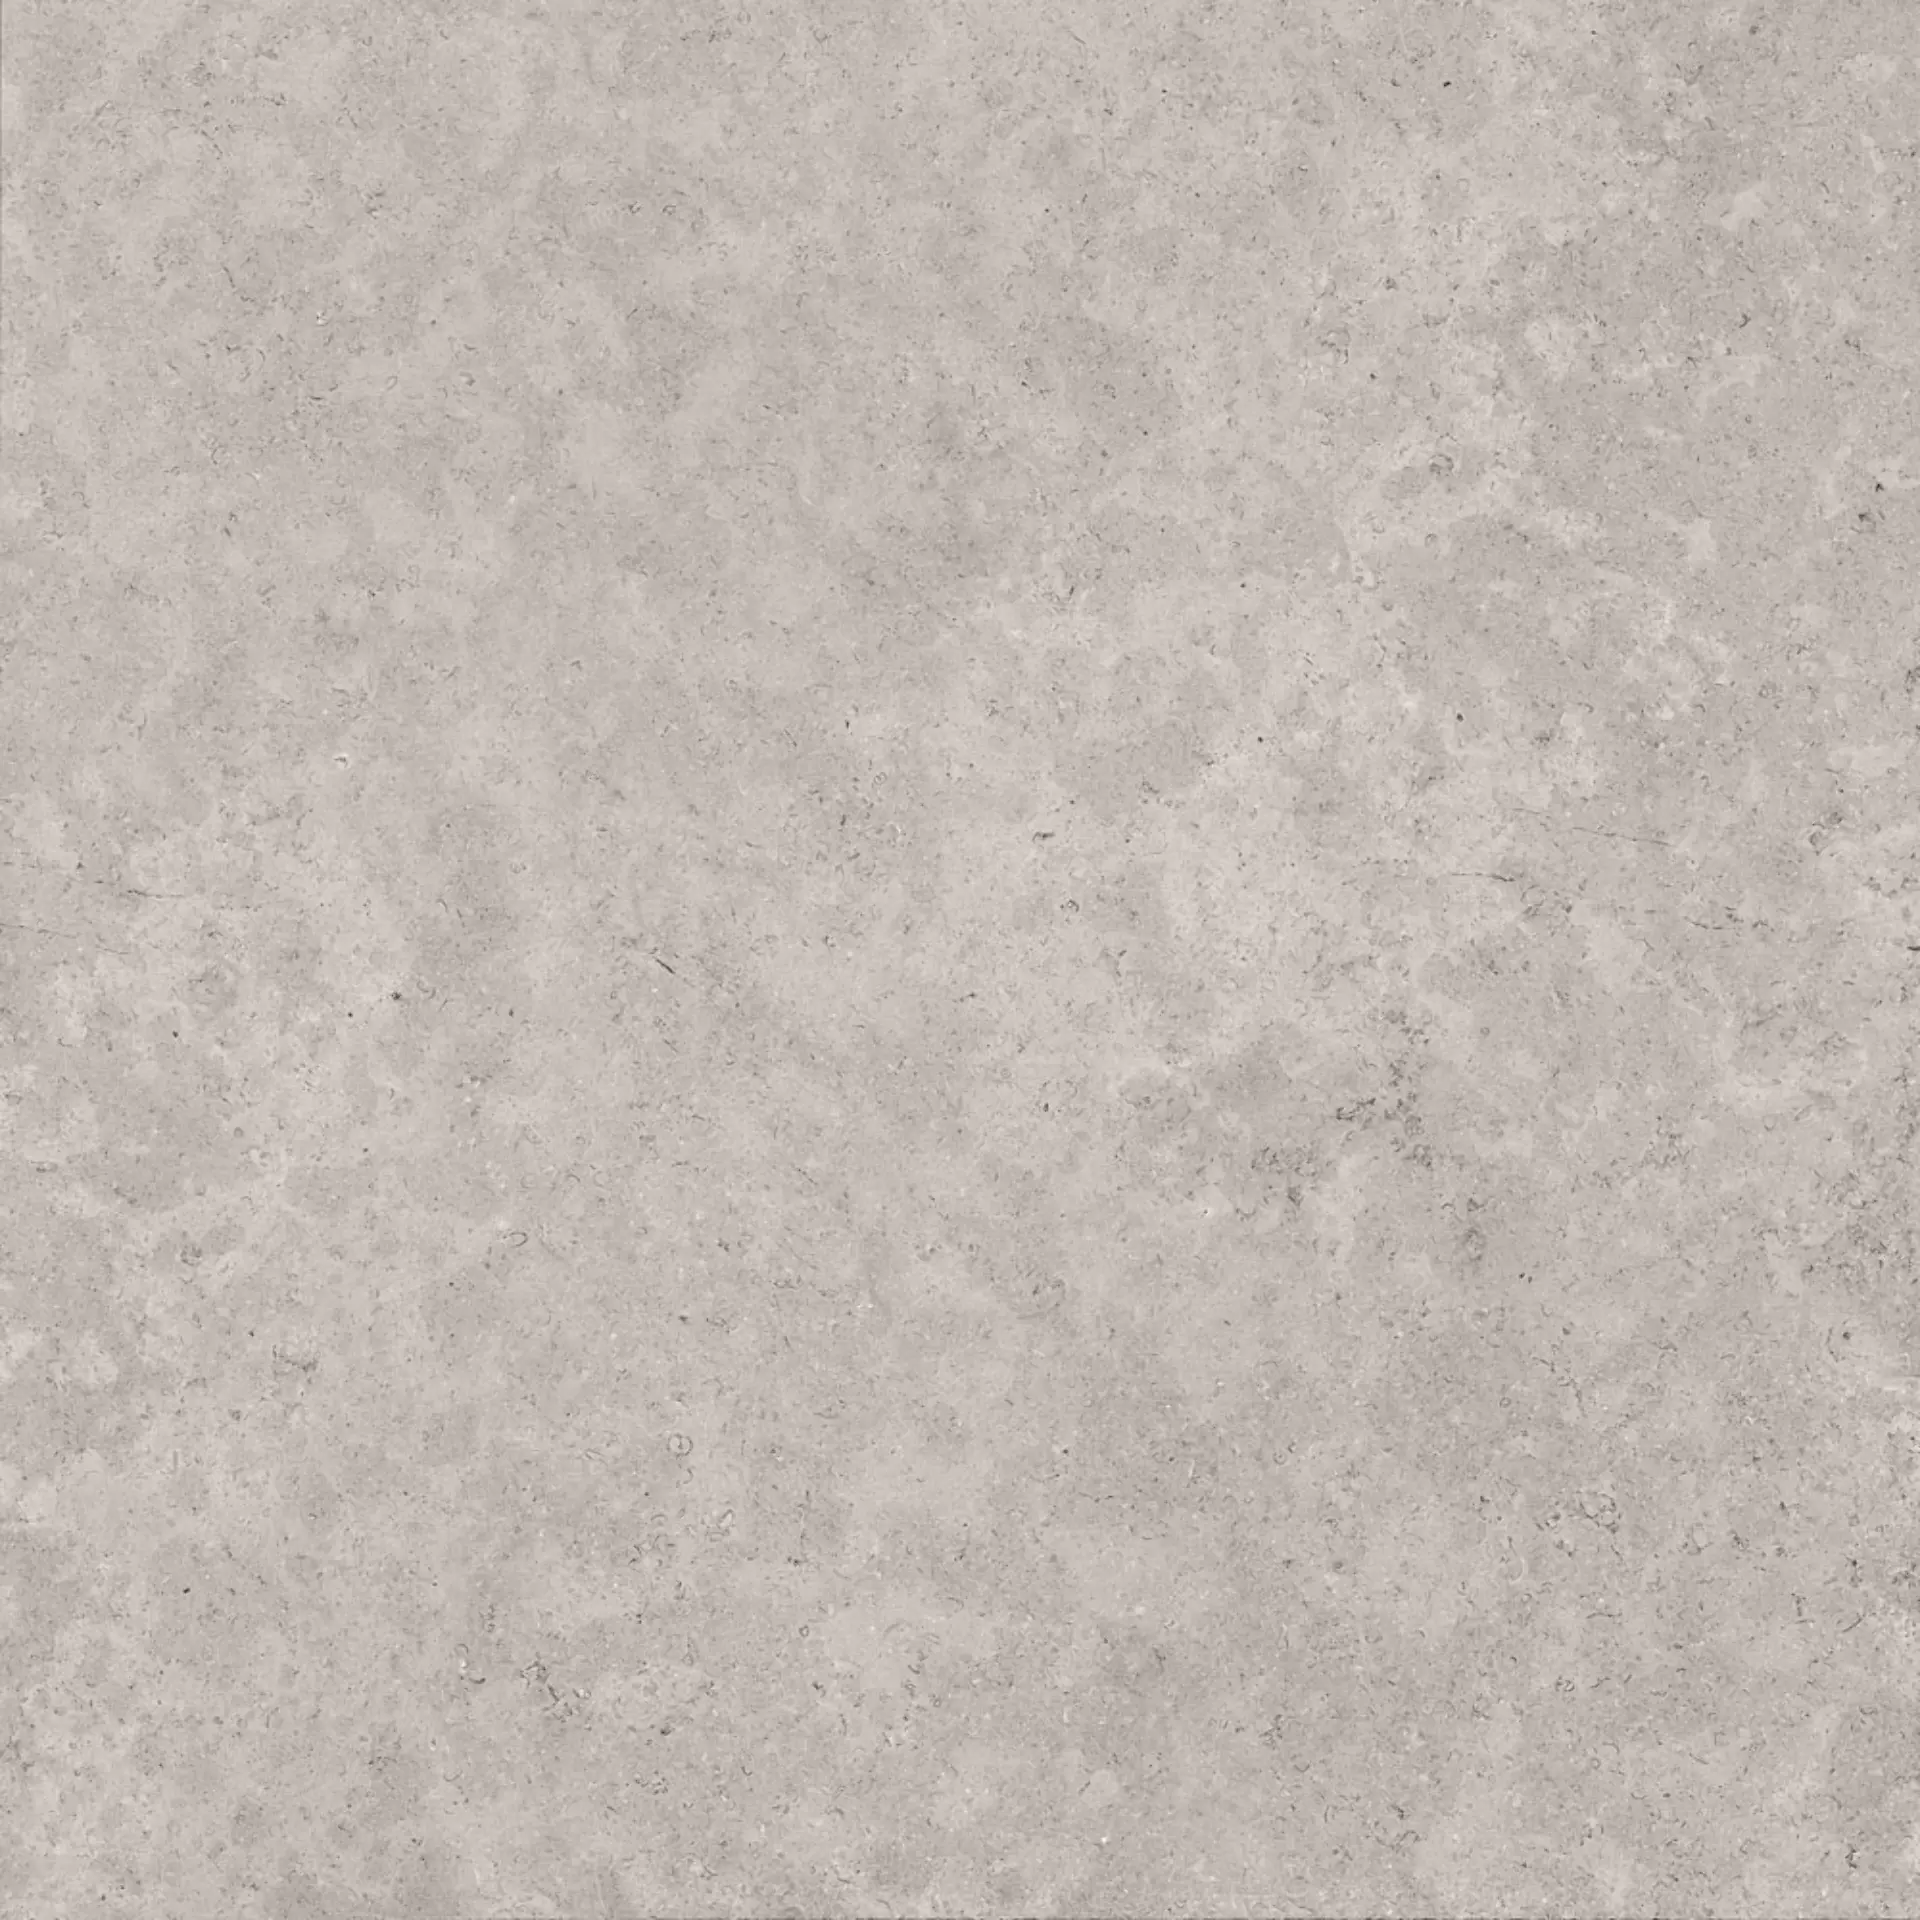 Sant Agostino Unionstone 2 Cedre Grey Natural CSACEDGR12 120x120cm rectified 10mm